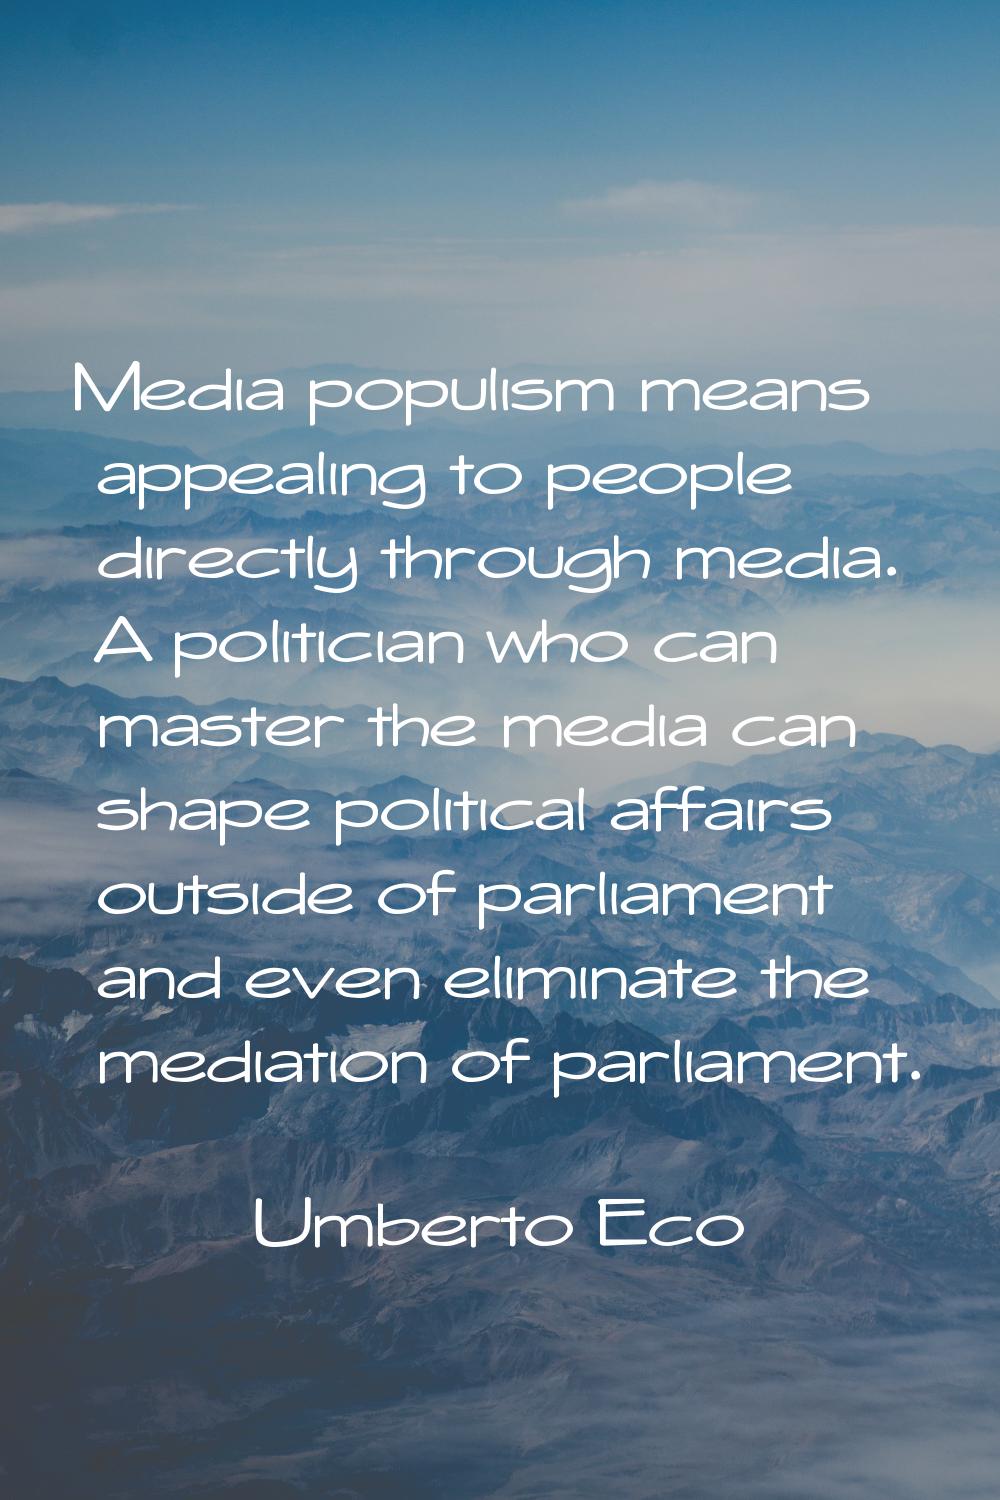 Media populism means appealing to people directly through media. A politician who can master the me